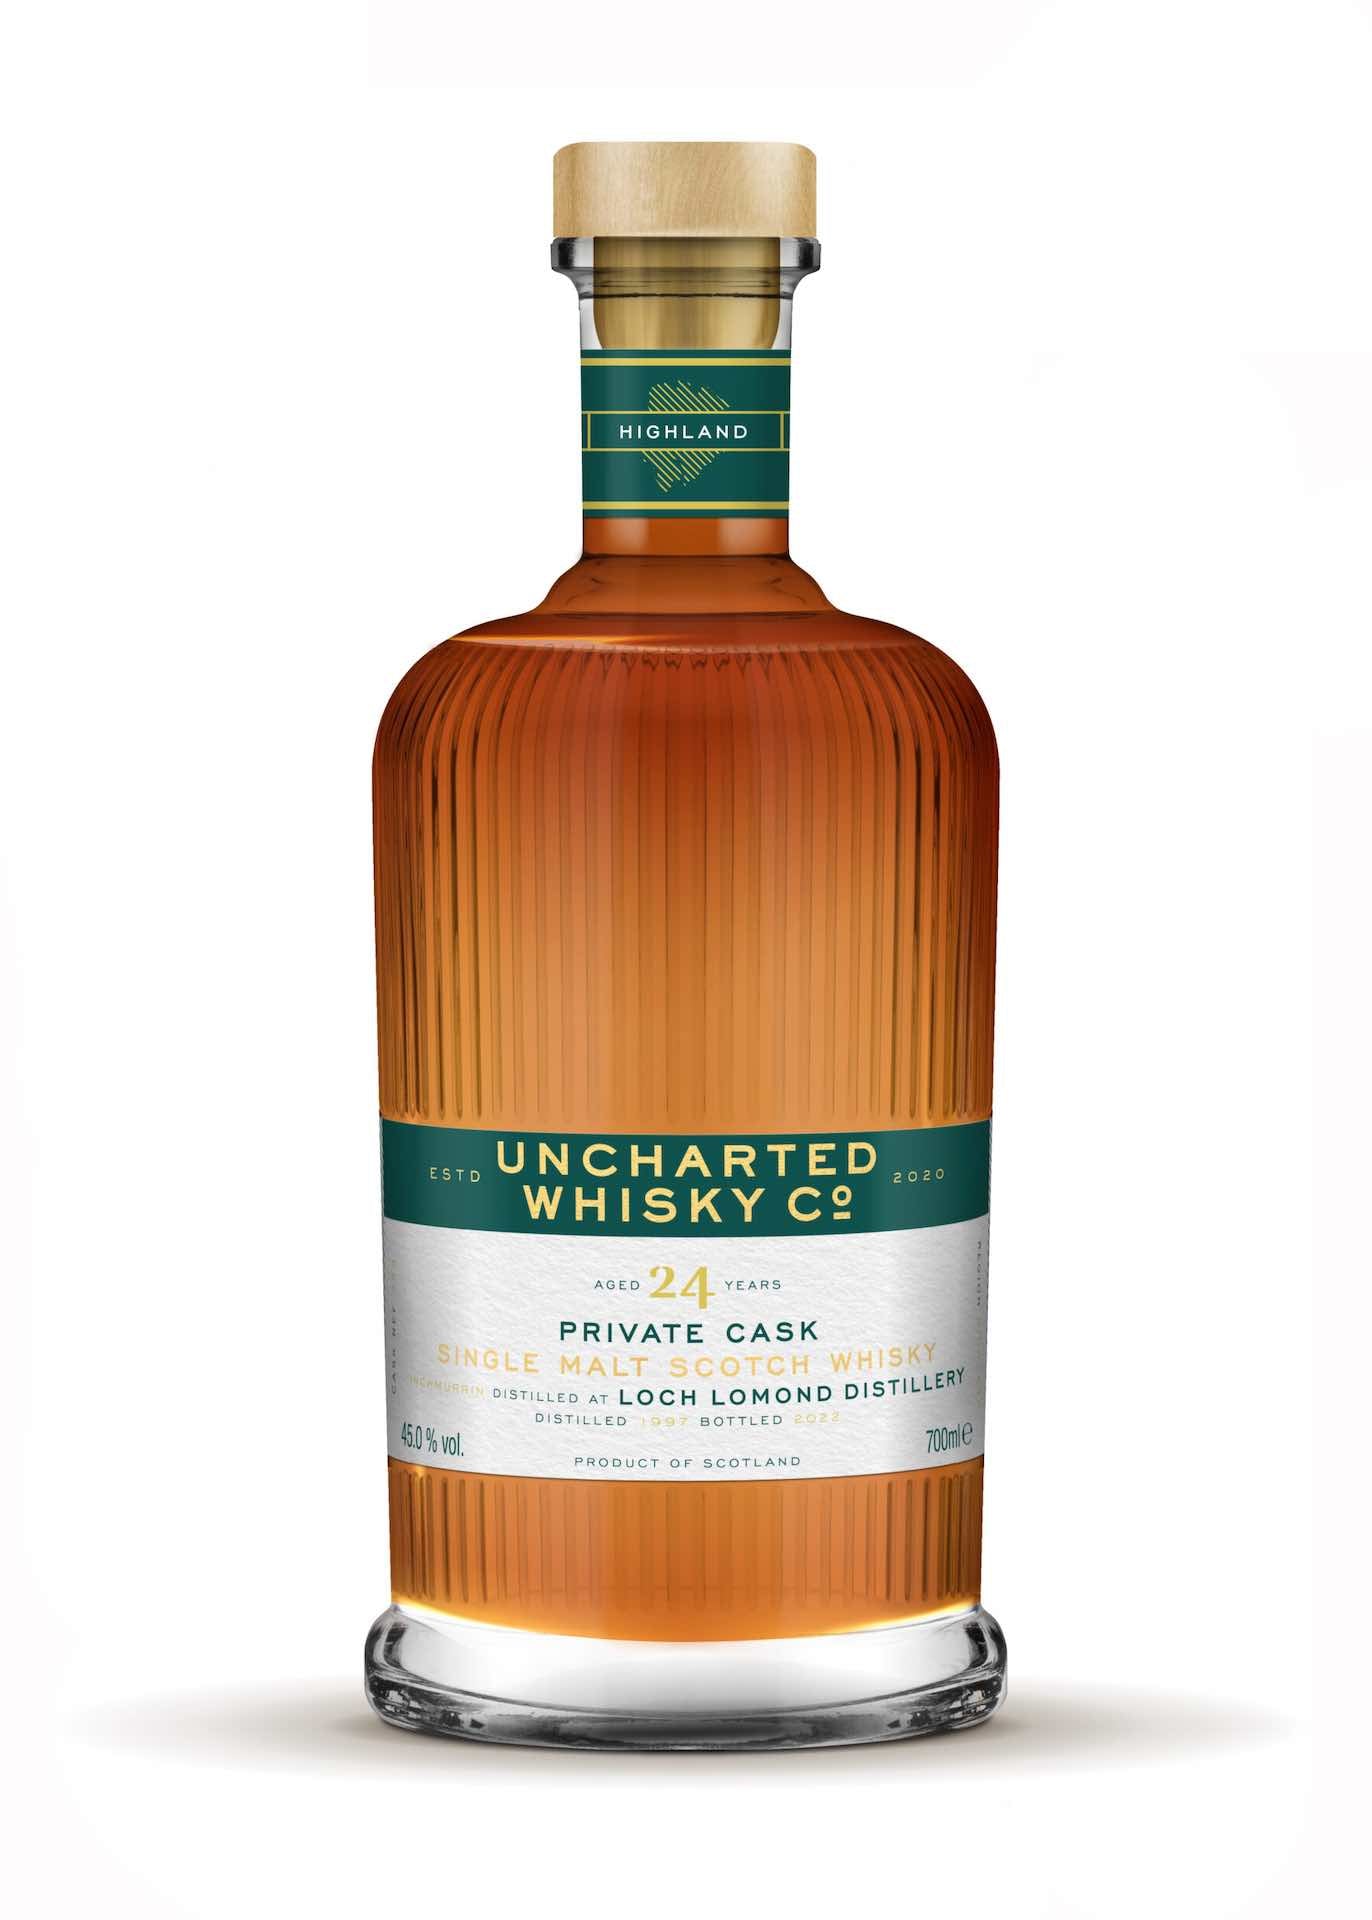 Uncharted Whisky Co, Loch Lomond Inchmurrin 24 Year Old